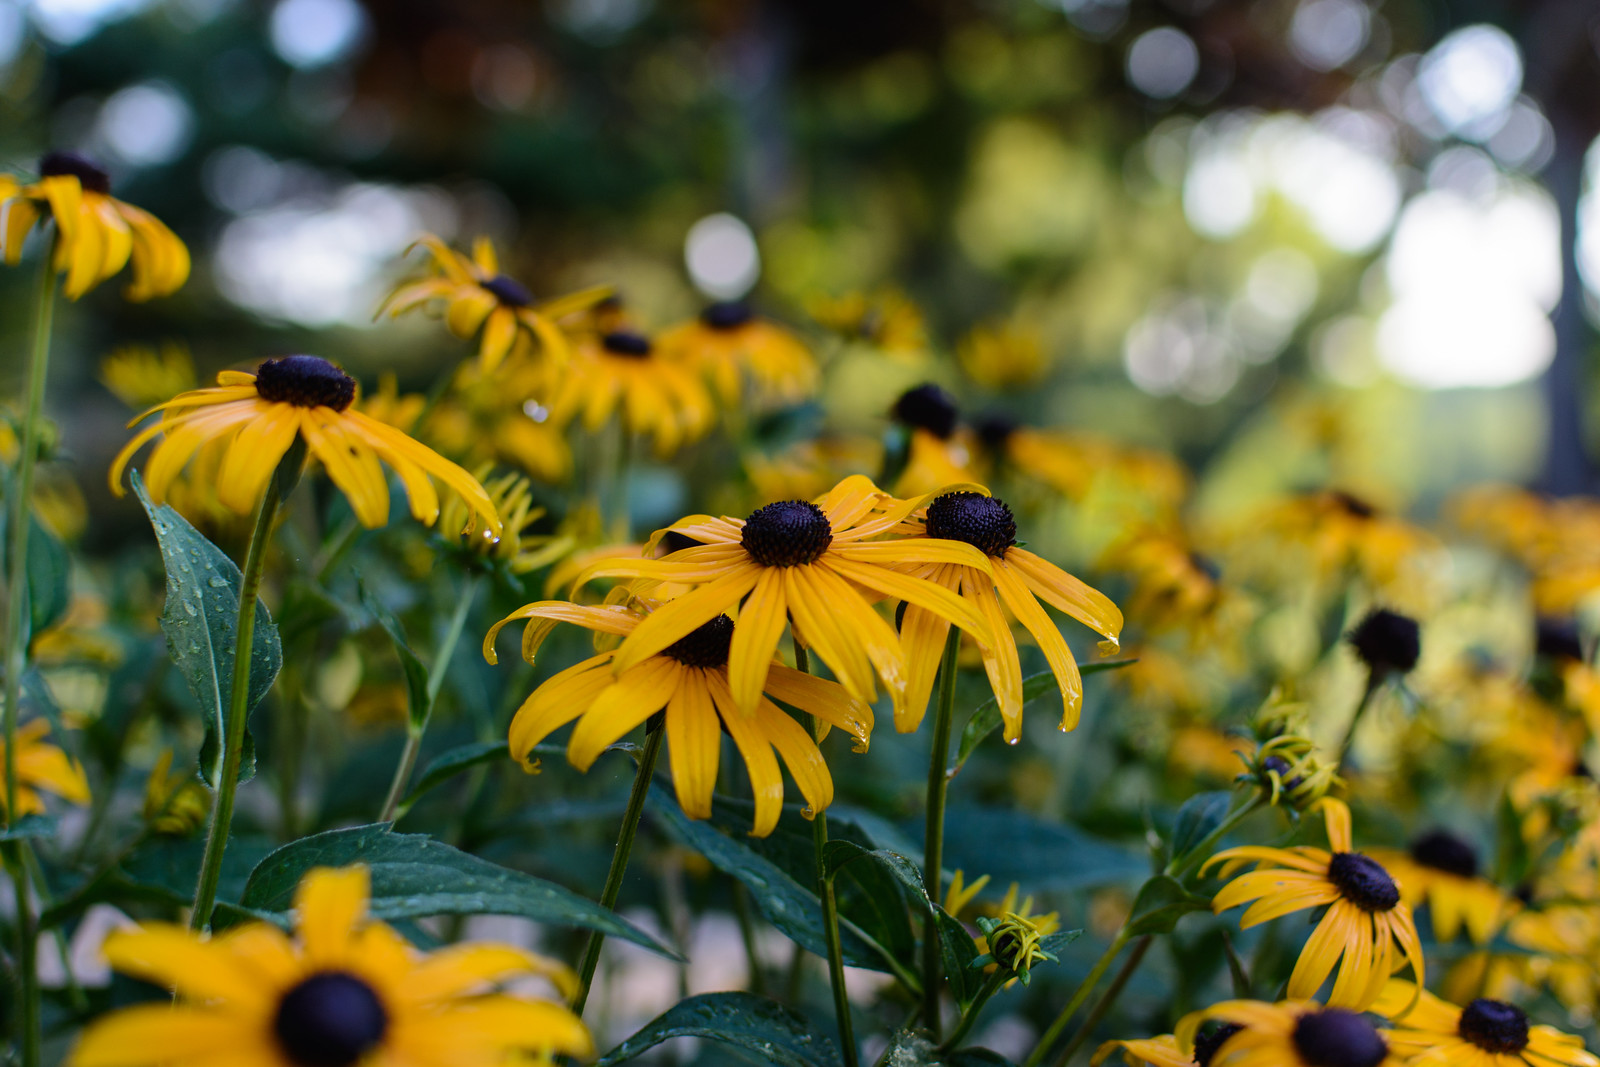 Black-Eyed Susans - One of the South Florida flowers we love